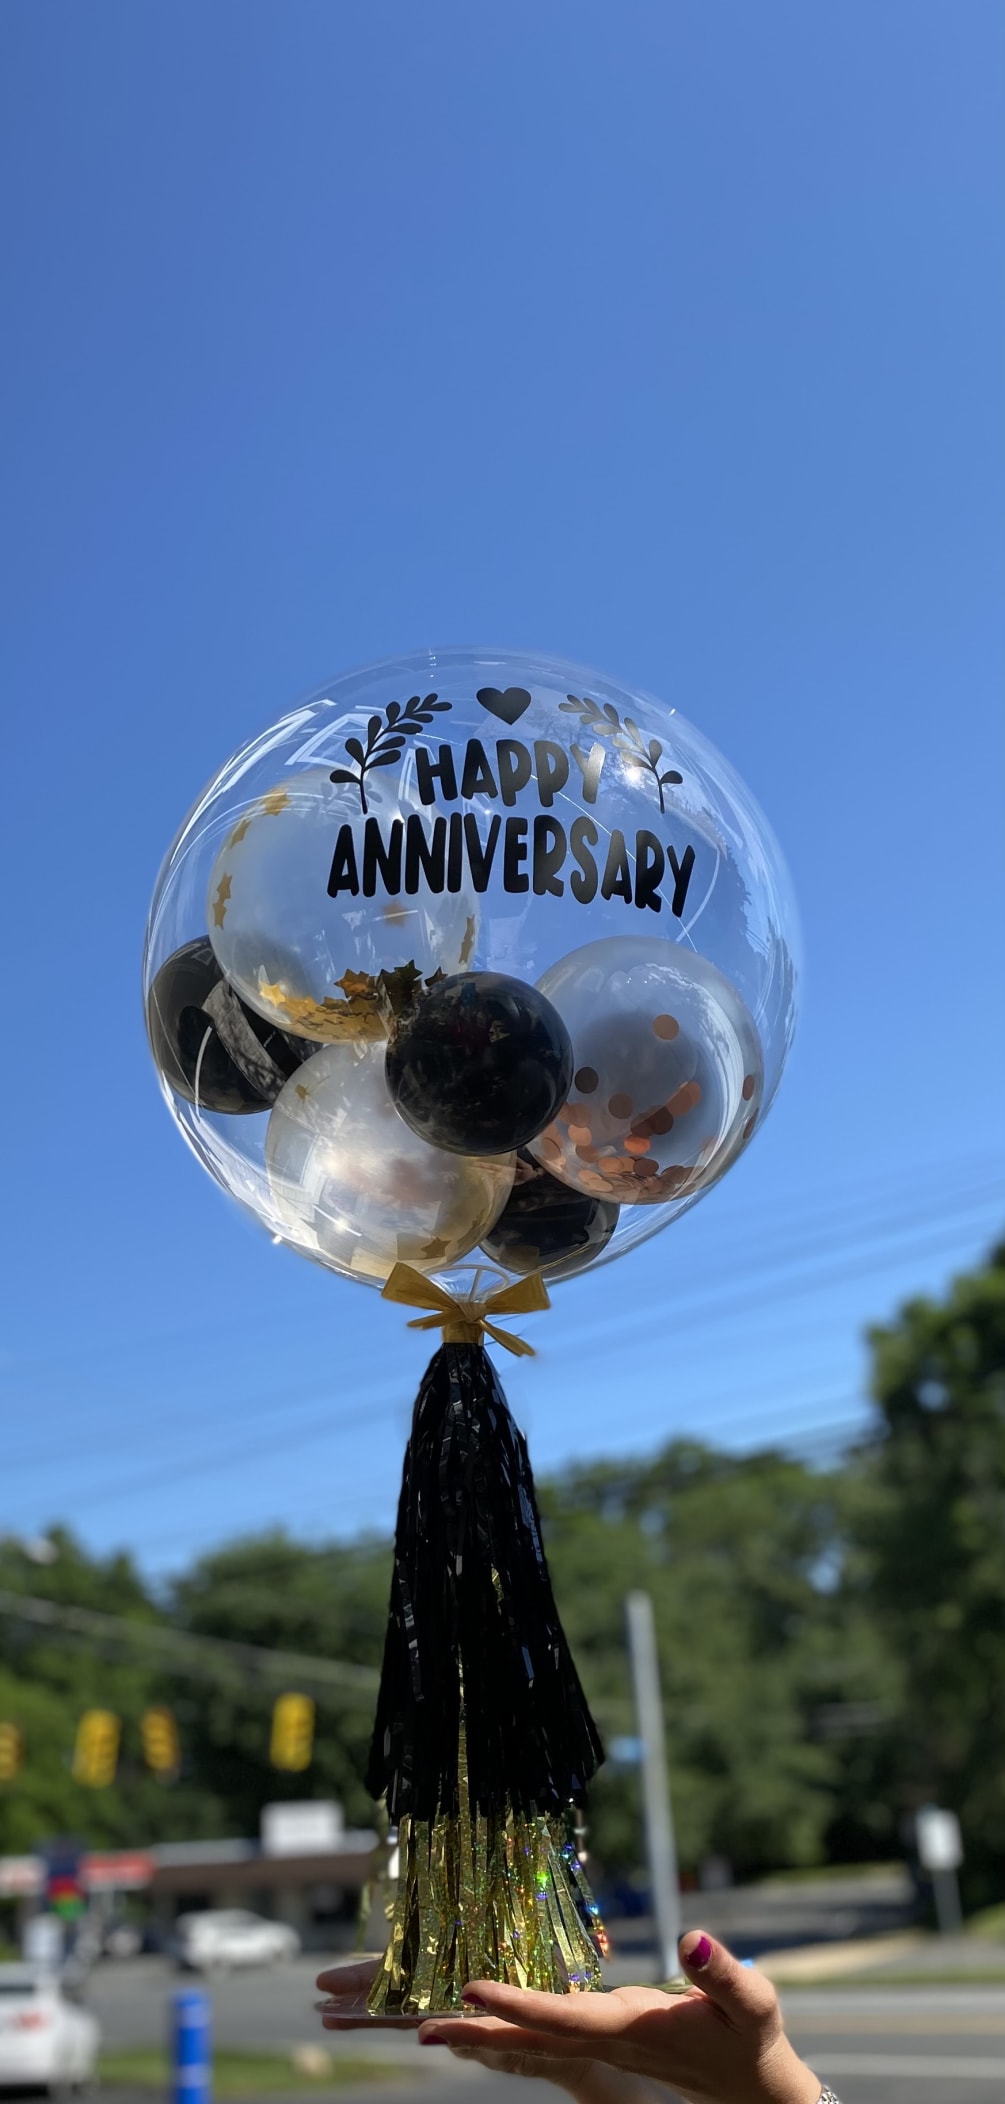 Celebrate an amazing milestone with this unique balloon arrangement! A one of